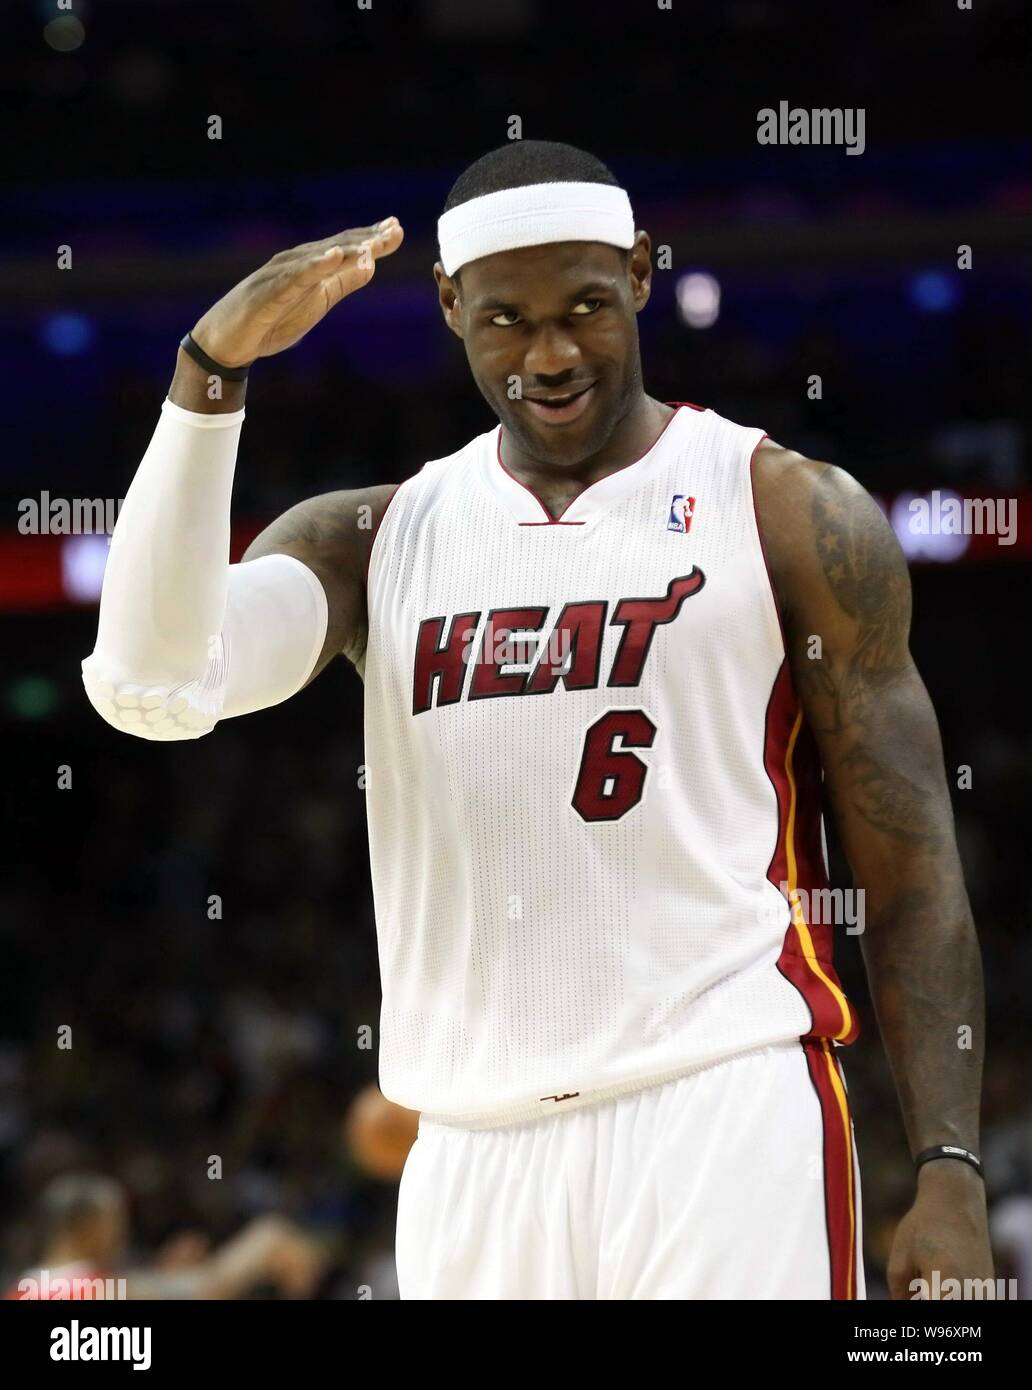 LeBron James of the Miami Heat gestures as he and his teammate compete against the Los Angeles Clippers during their second match of their NBA China G Stock Photo